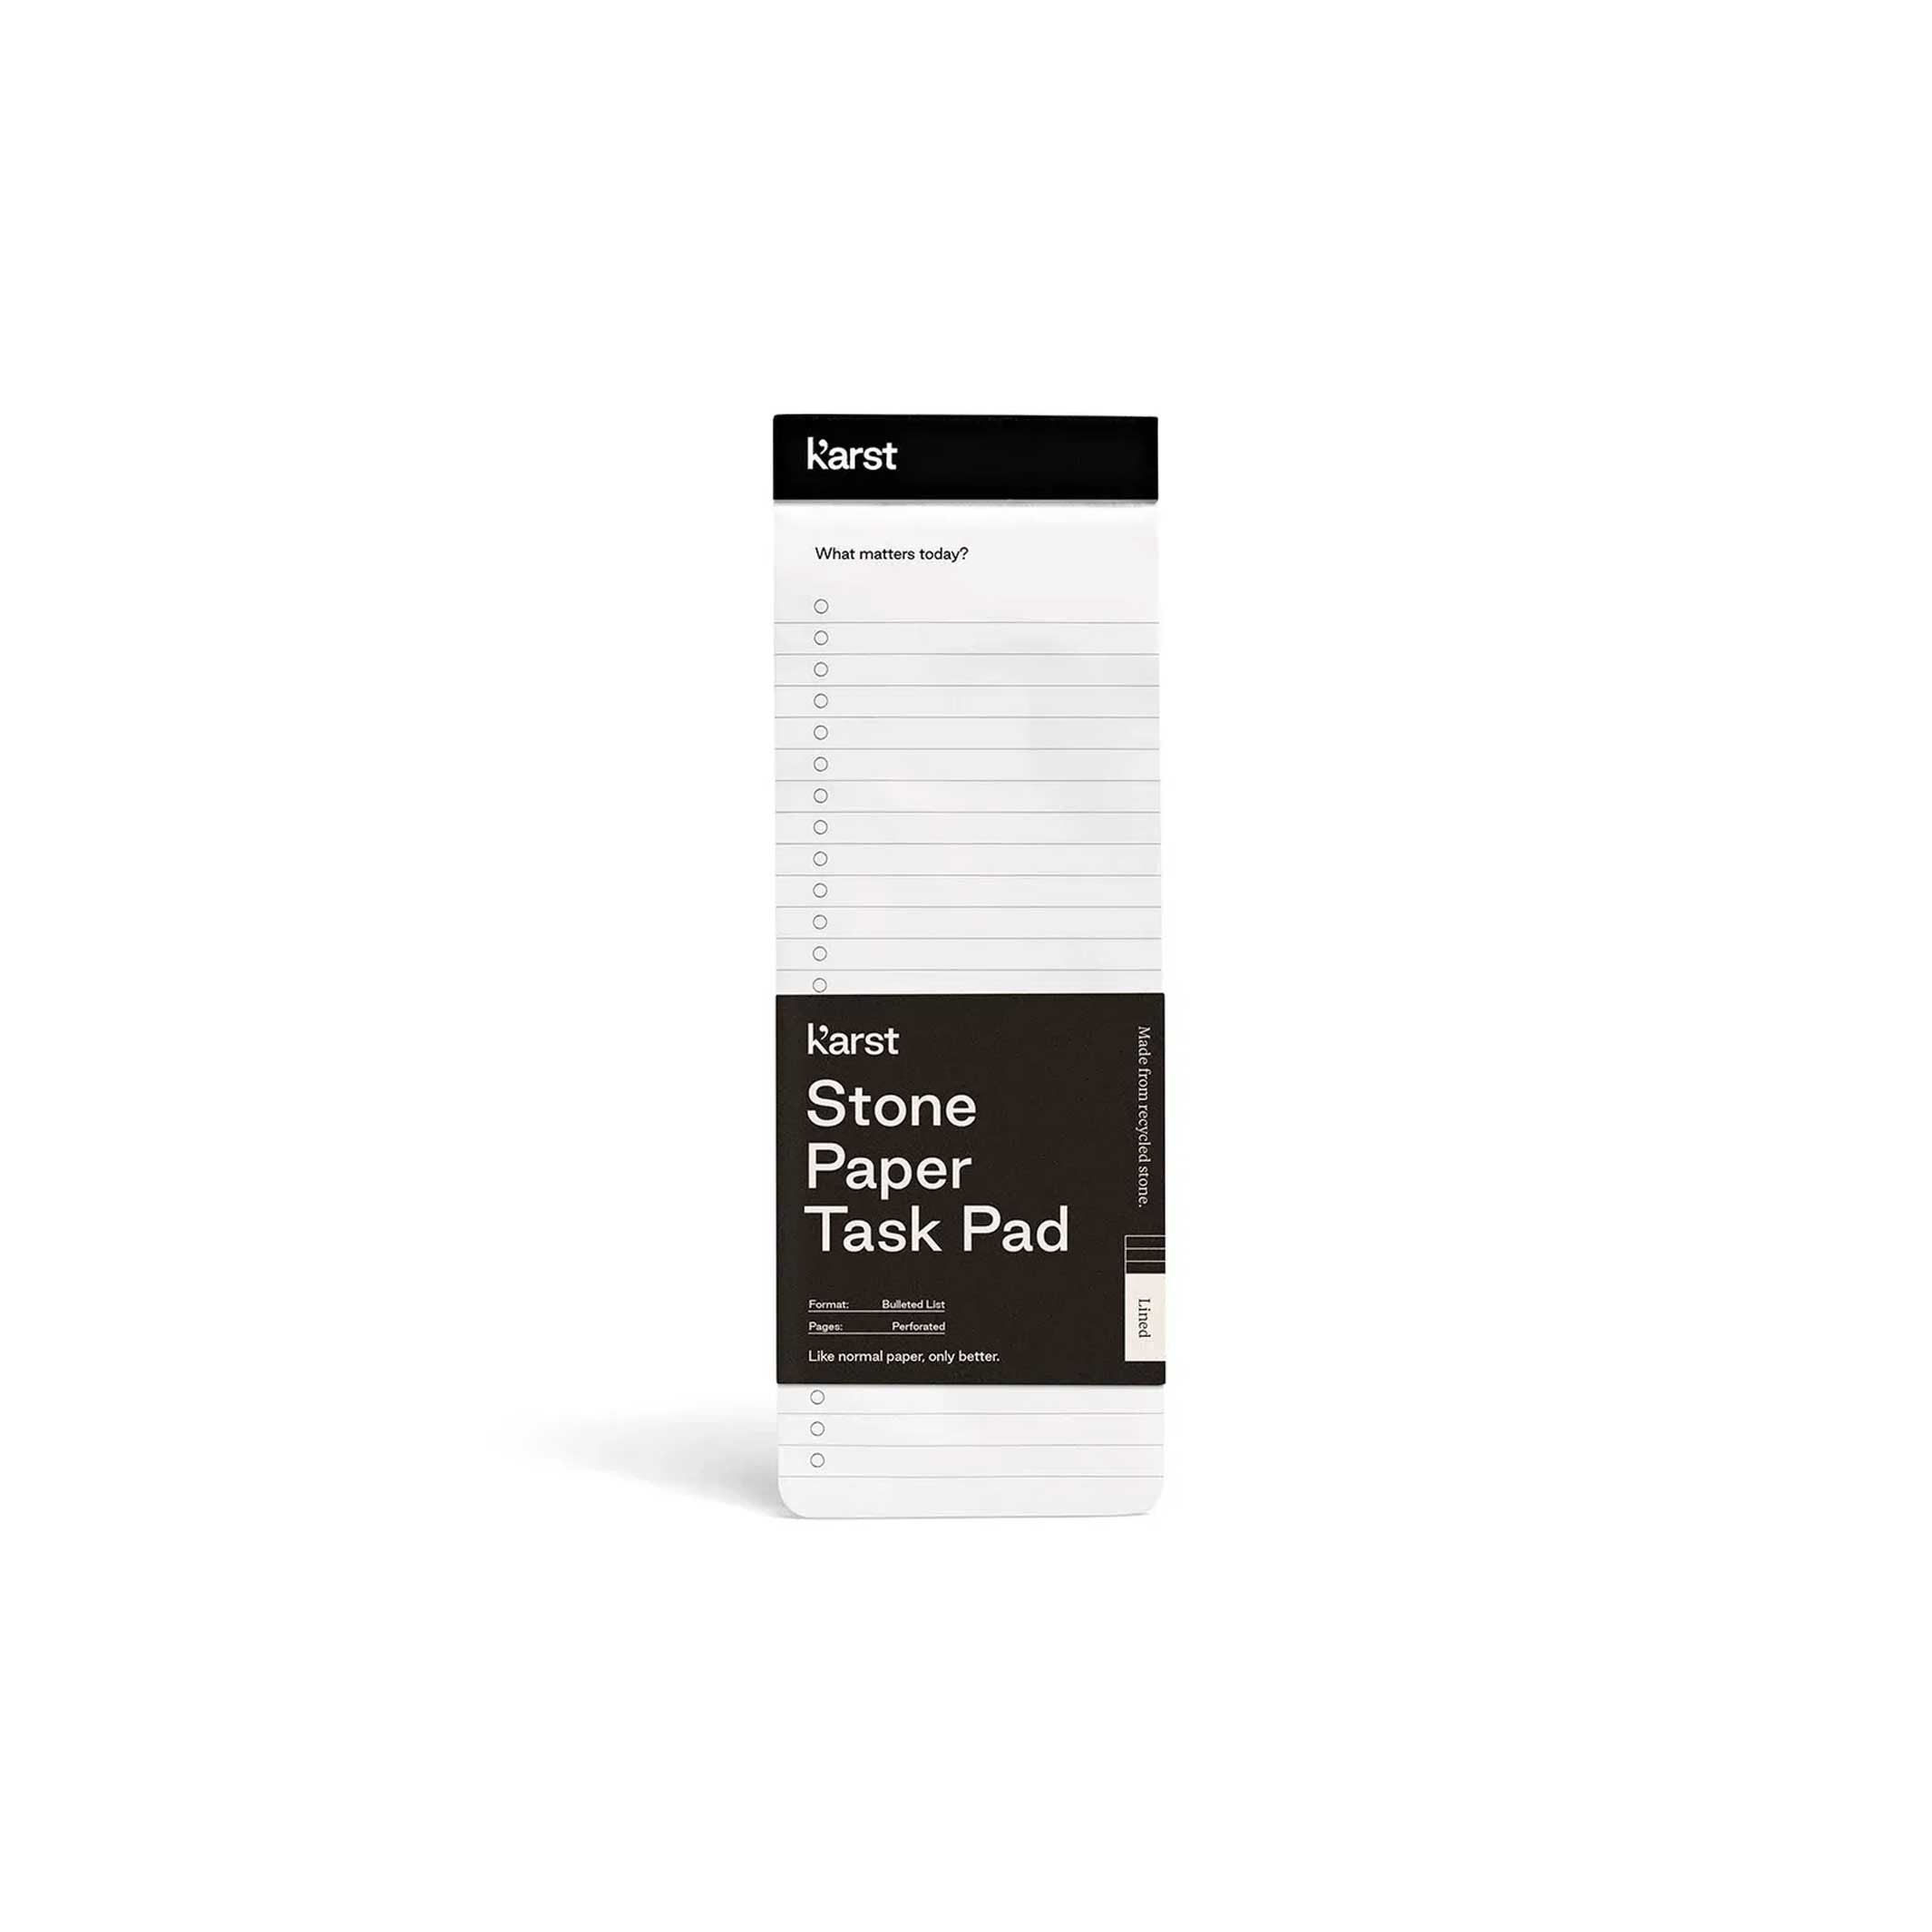 TASK PAD | for your notes, lists & reminders | Karst Stone Paper